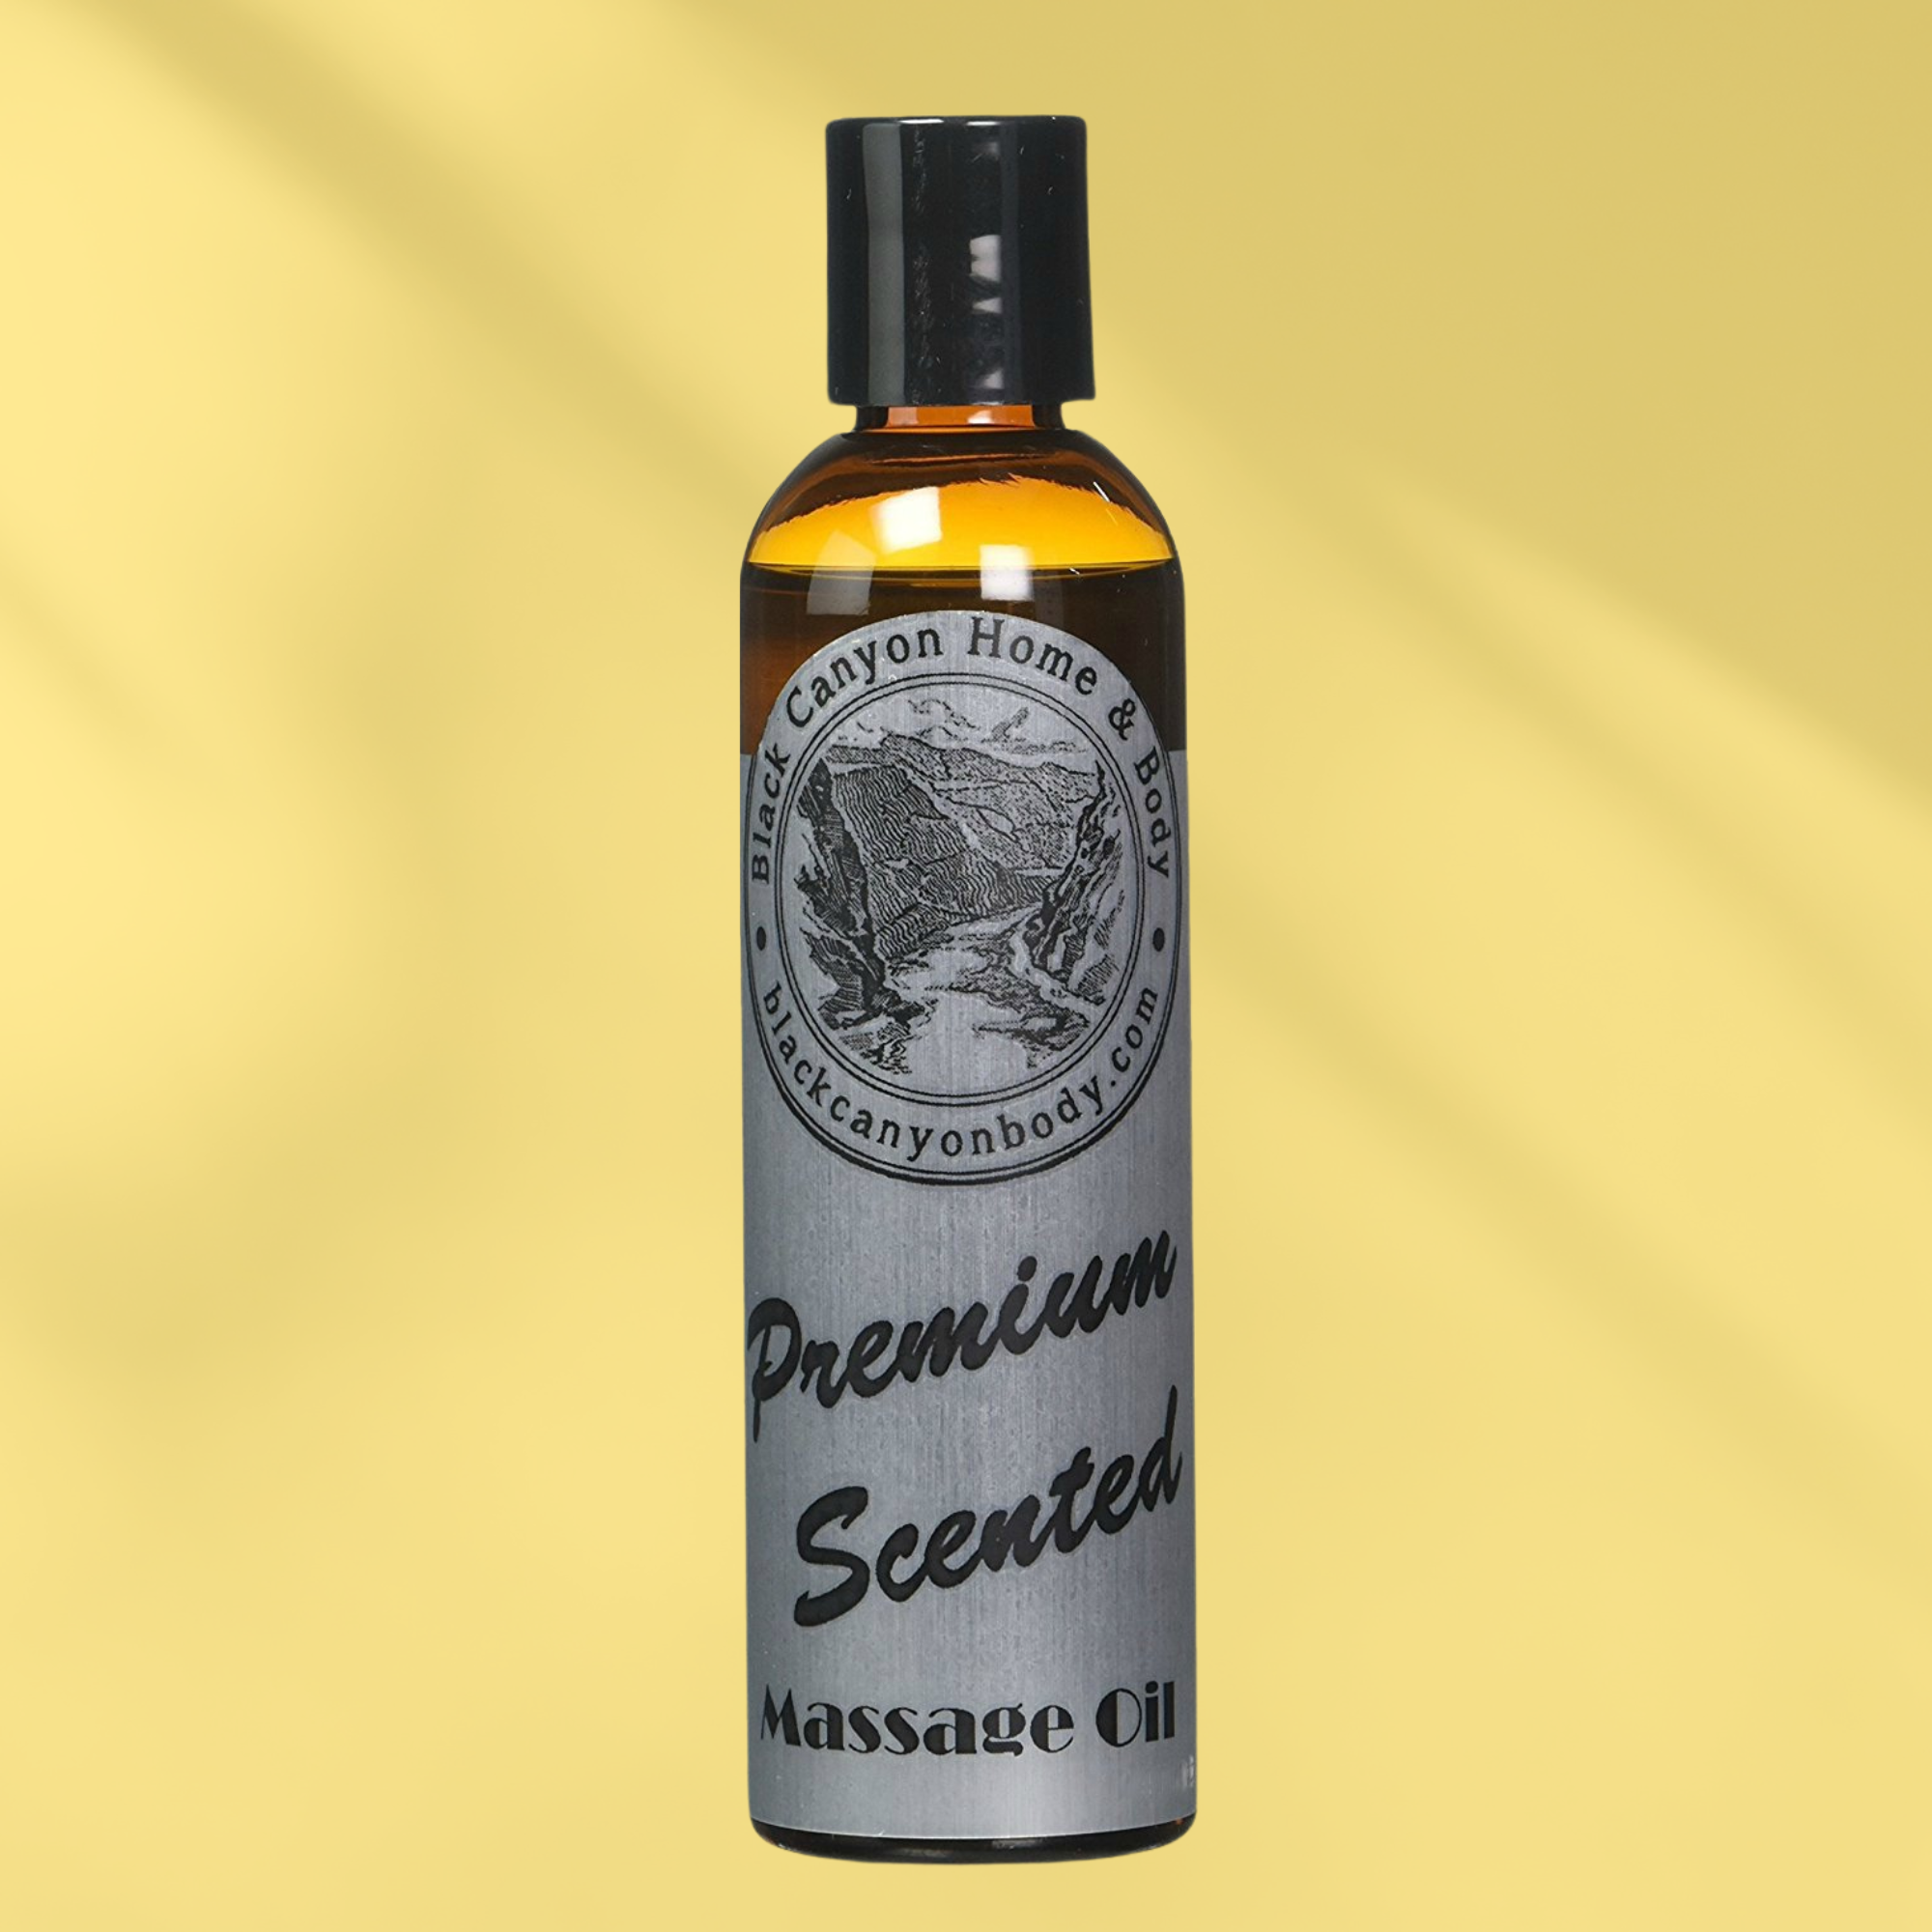 Black Canyon April Showers Scented Massage Oil